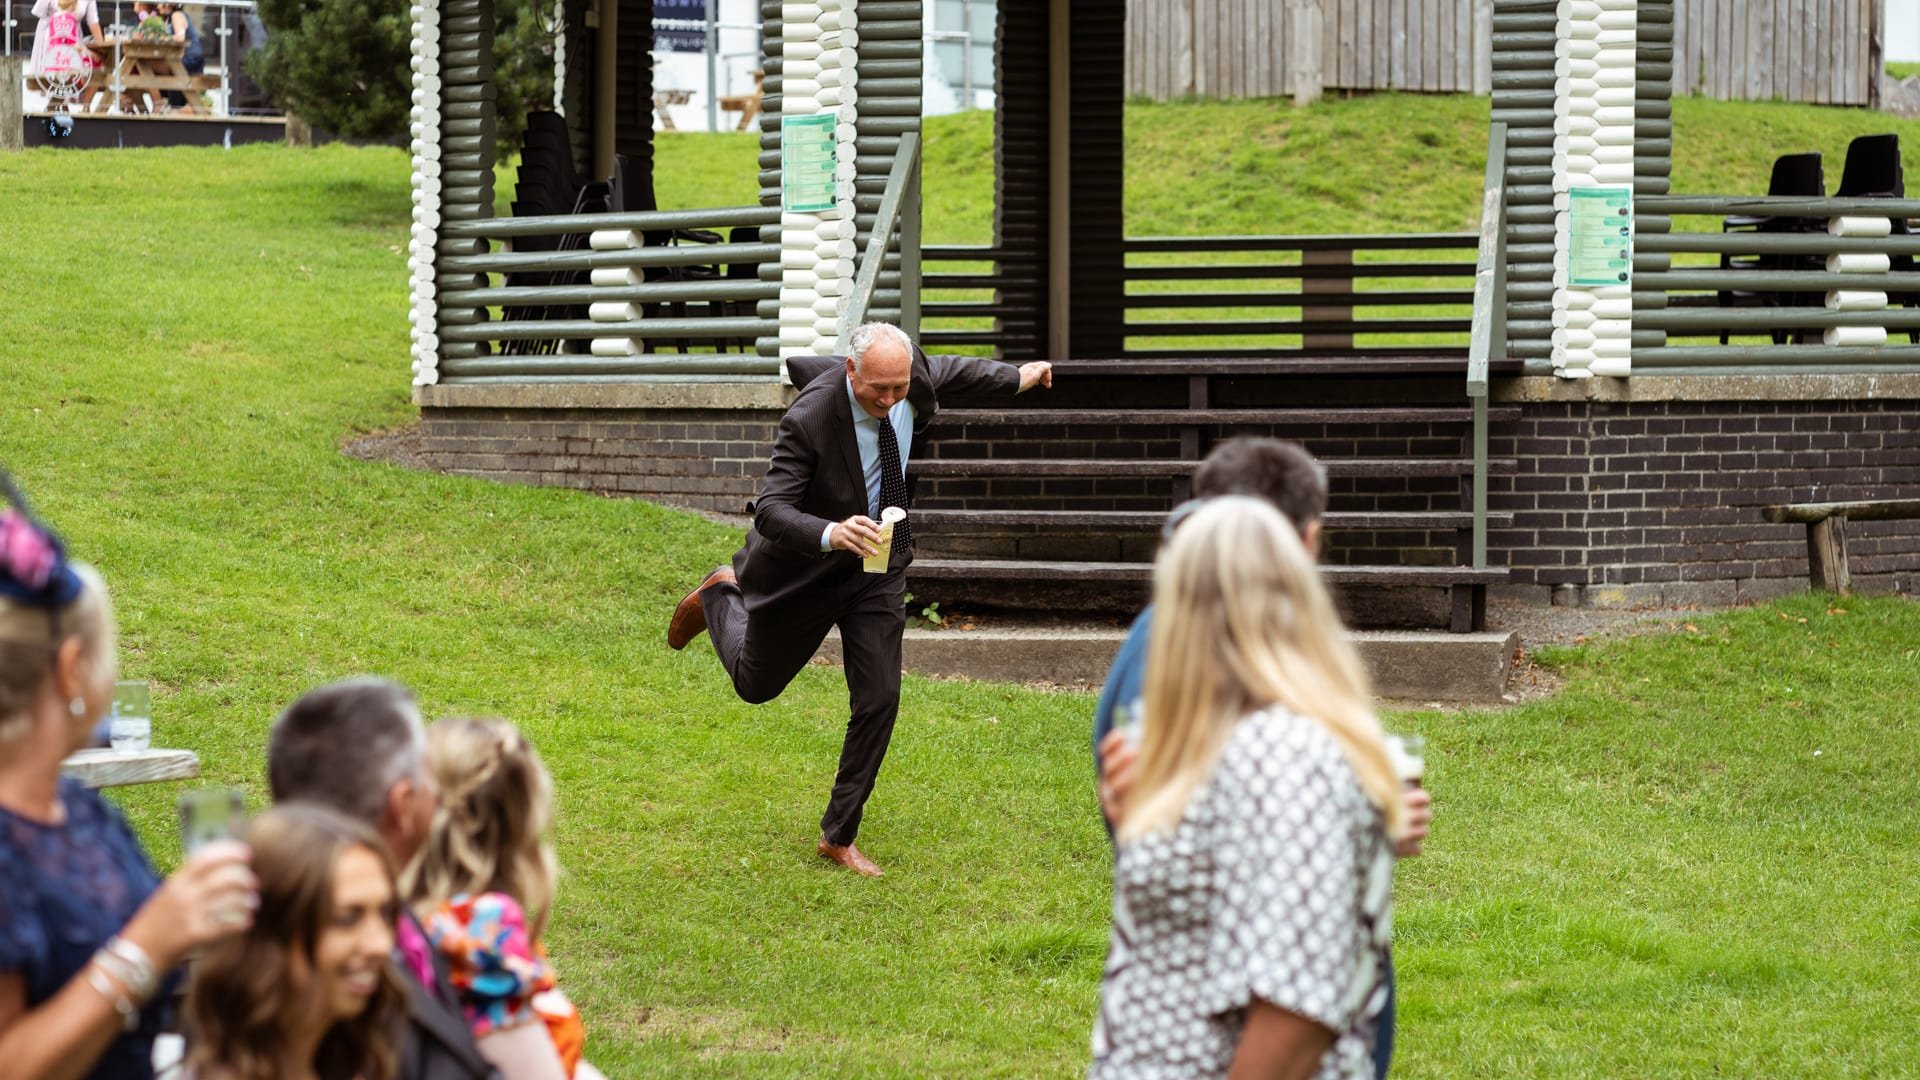 Wedding guest running and nearly falling over